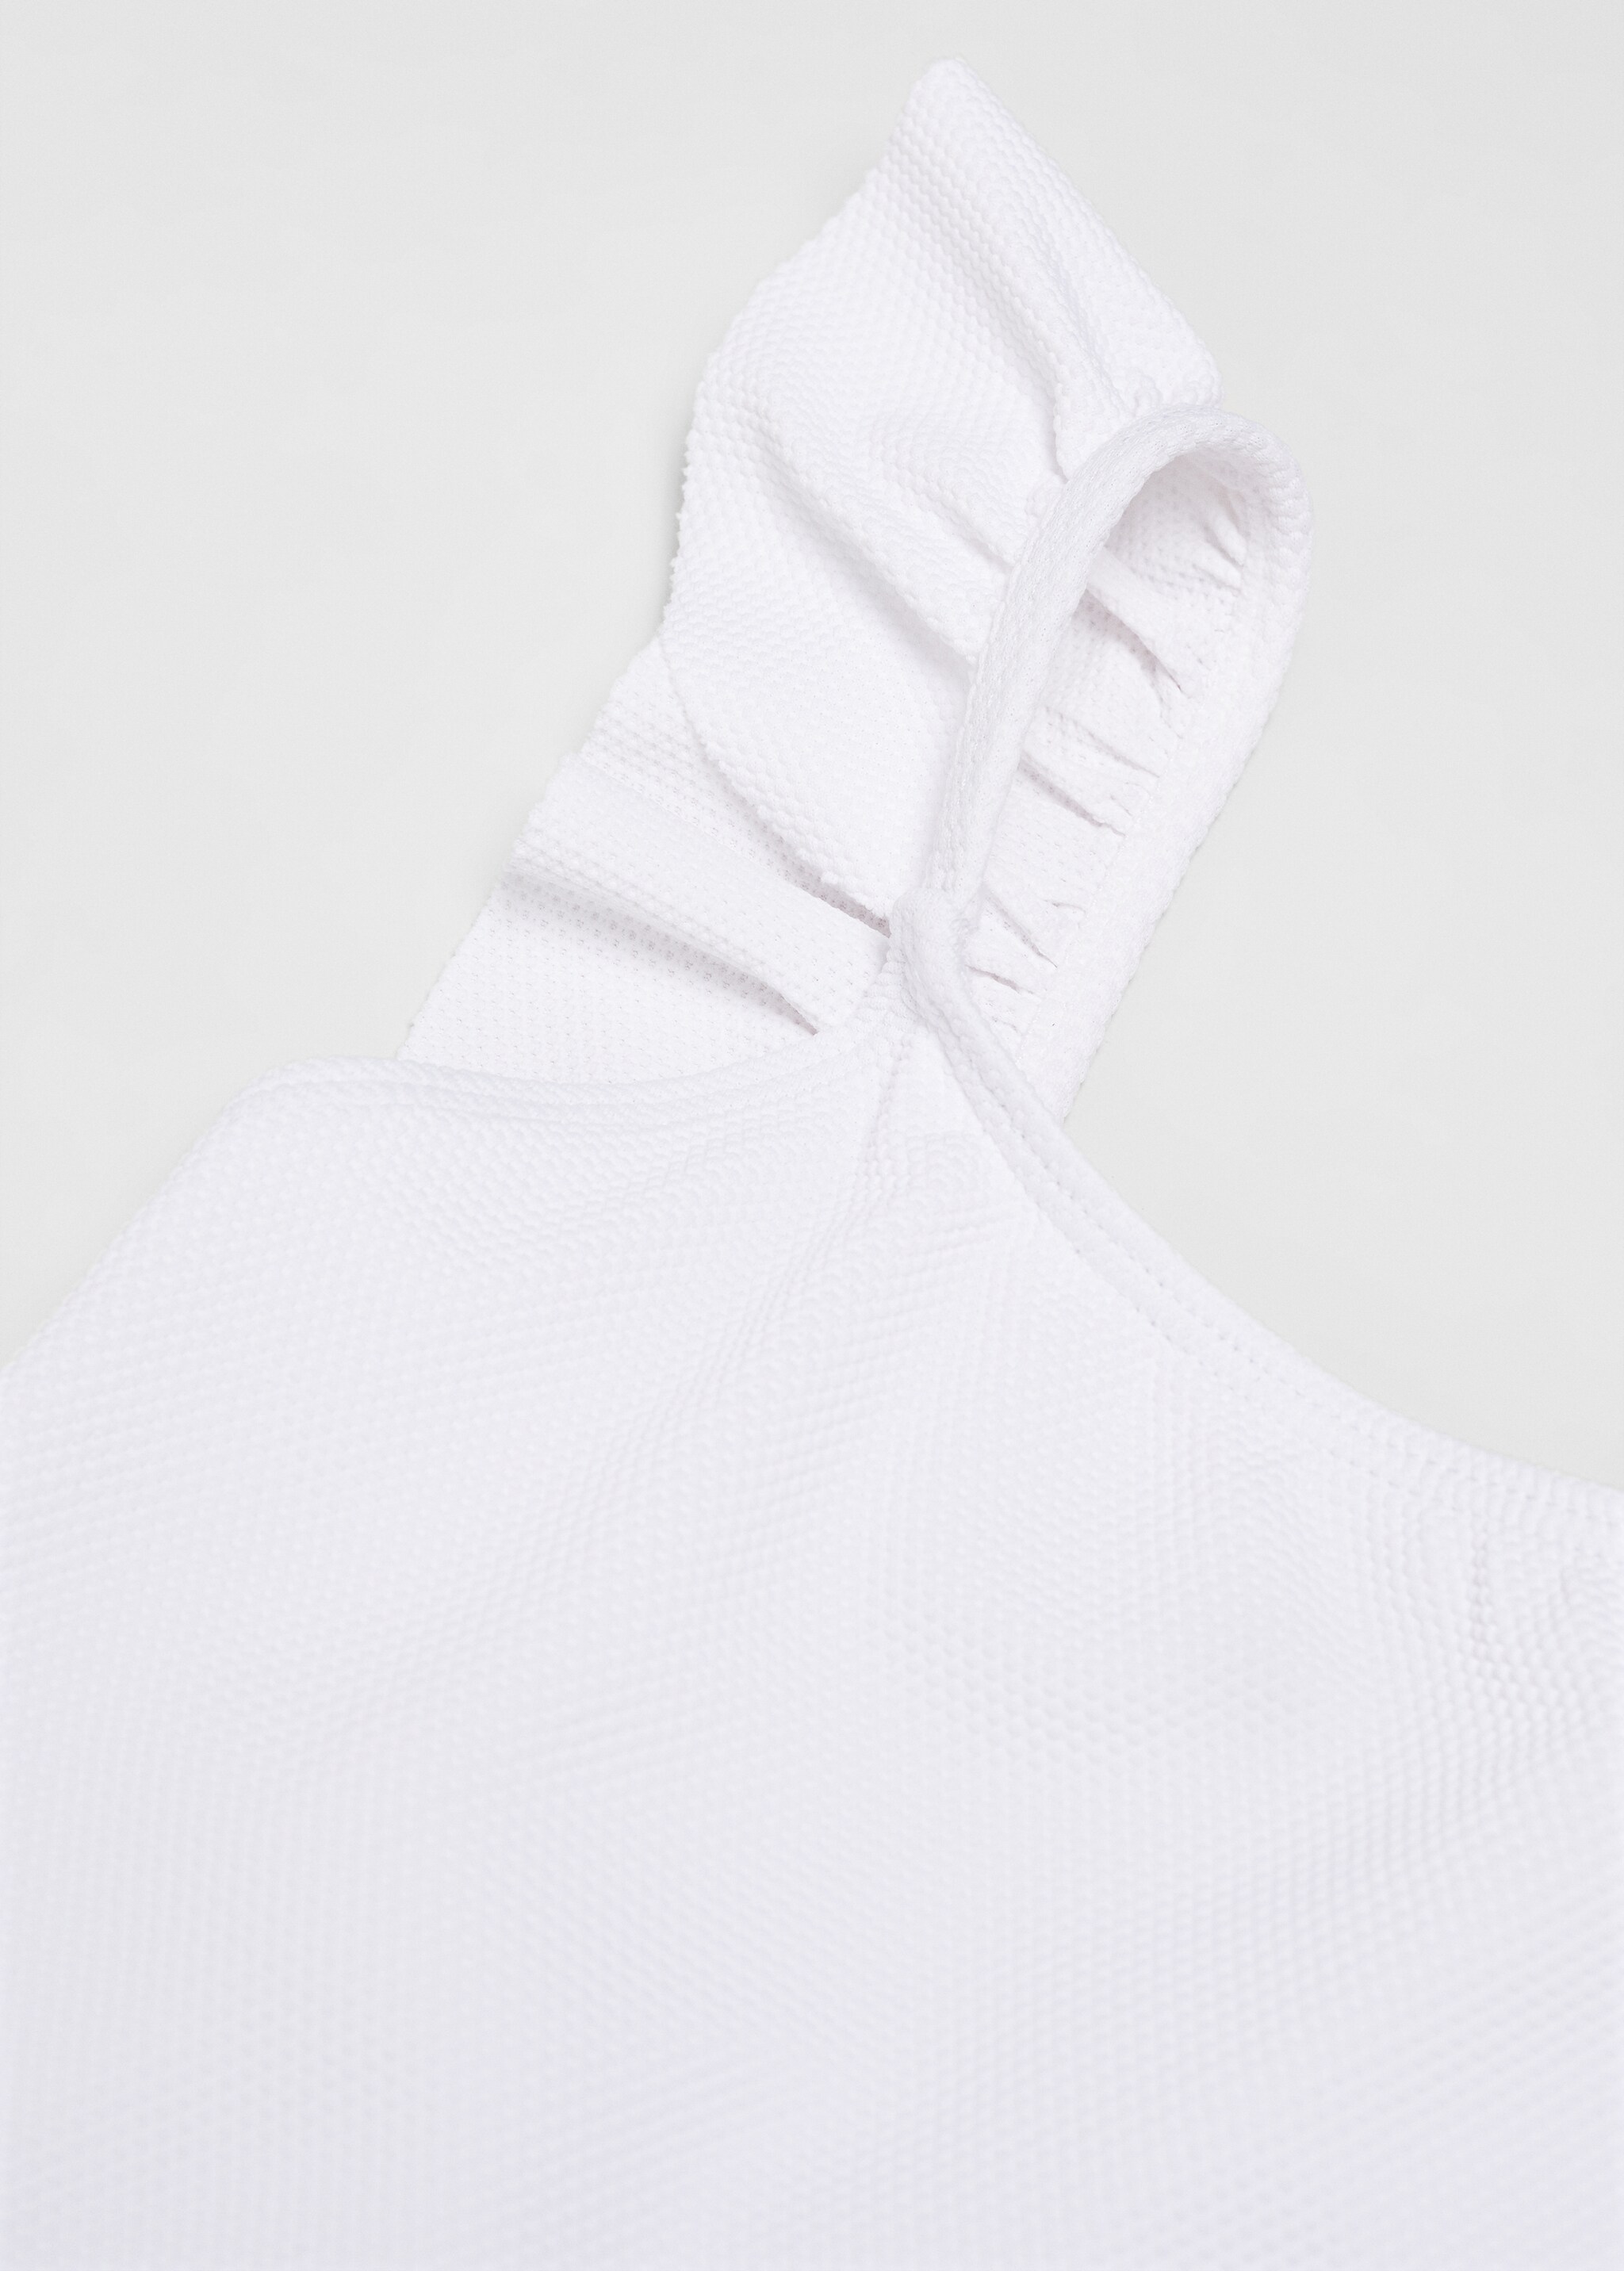 Texture ruffle swimsuit - Details of the article 8